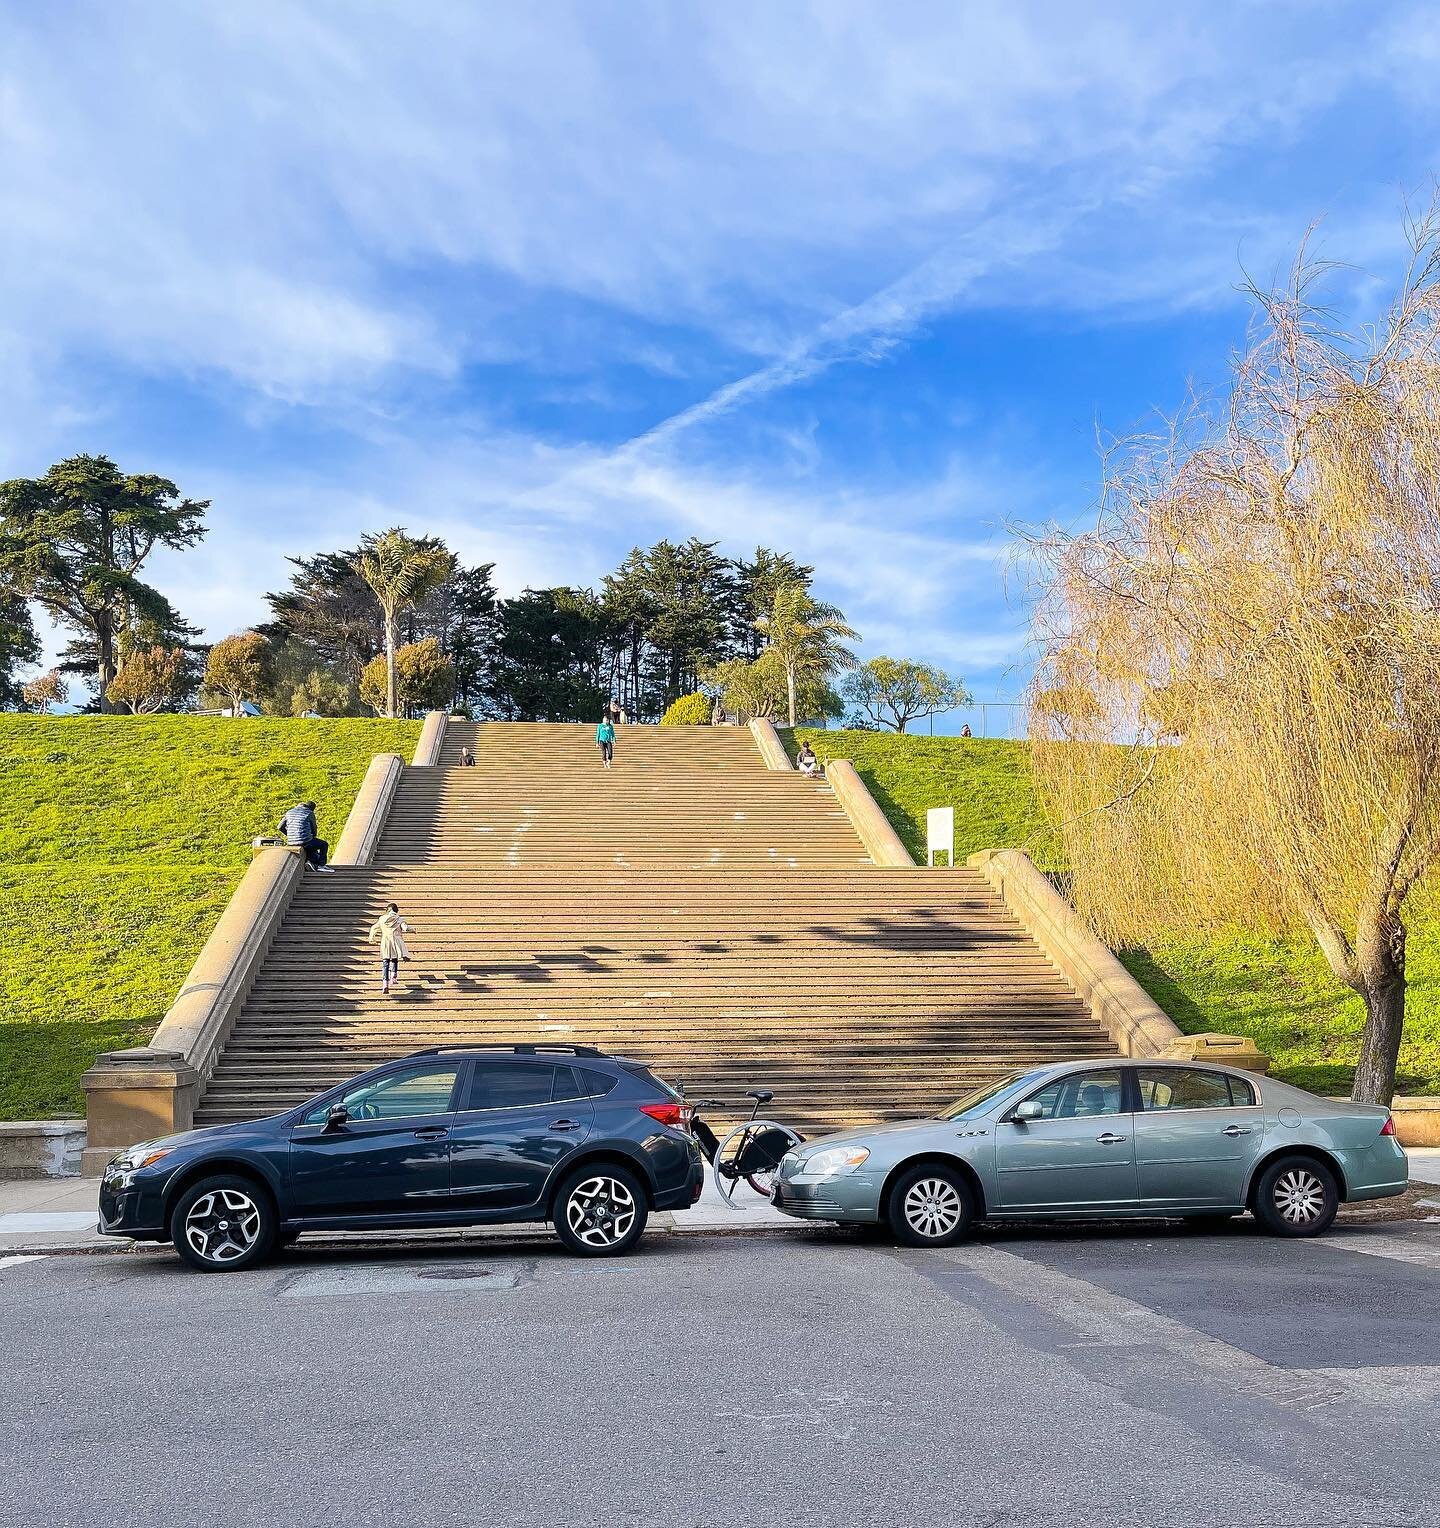 San Francisco stairs continued ✨ These ones are fun to run up and down.

📍 Alta Plaza Park, San Francisco

🚶&zwj;♀️ 3 out of 10 beautiful staircases in SF

#altaplazapark #howsfseessf #alwayssf #sfinsta #sfguide #sfstairs #asideofsf